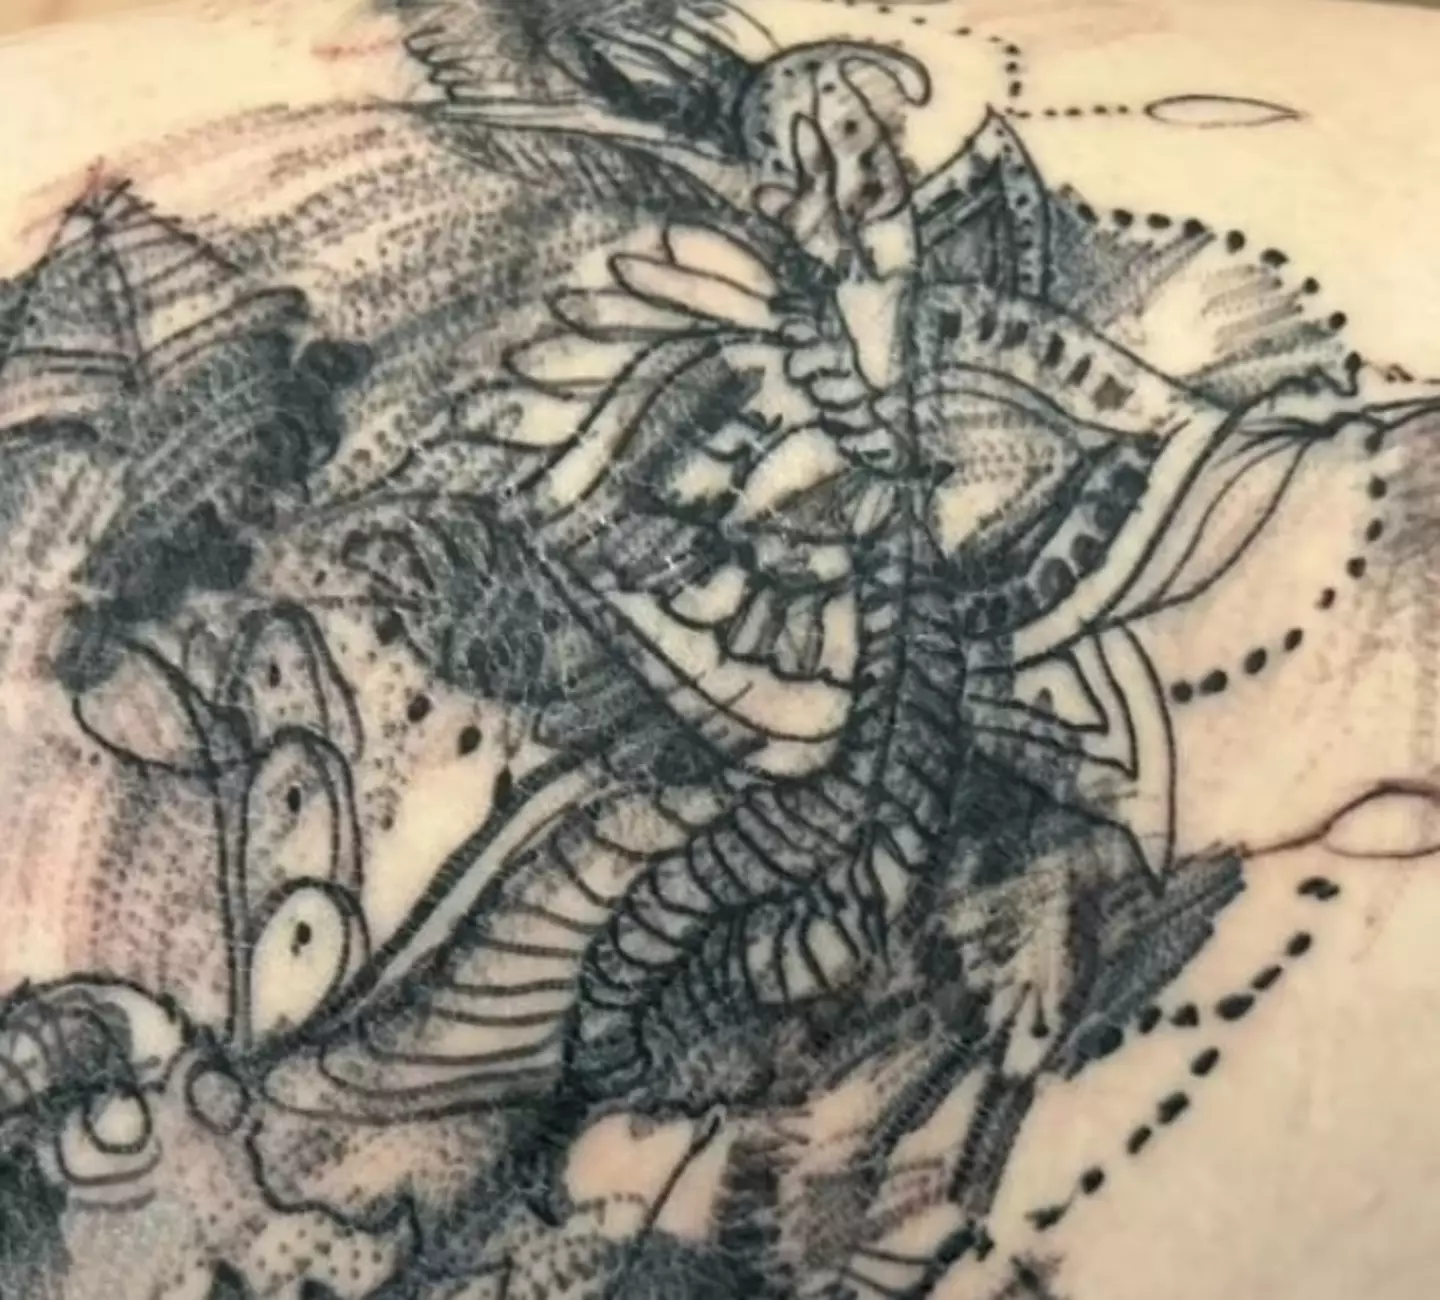 The tattoo she received. (8NewsNow)